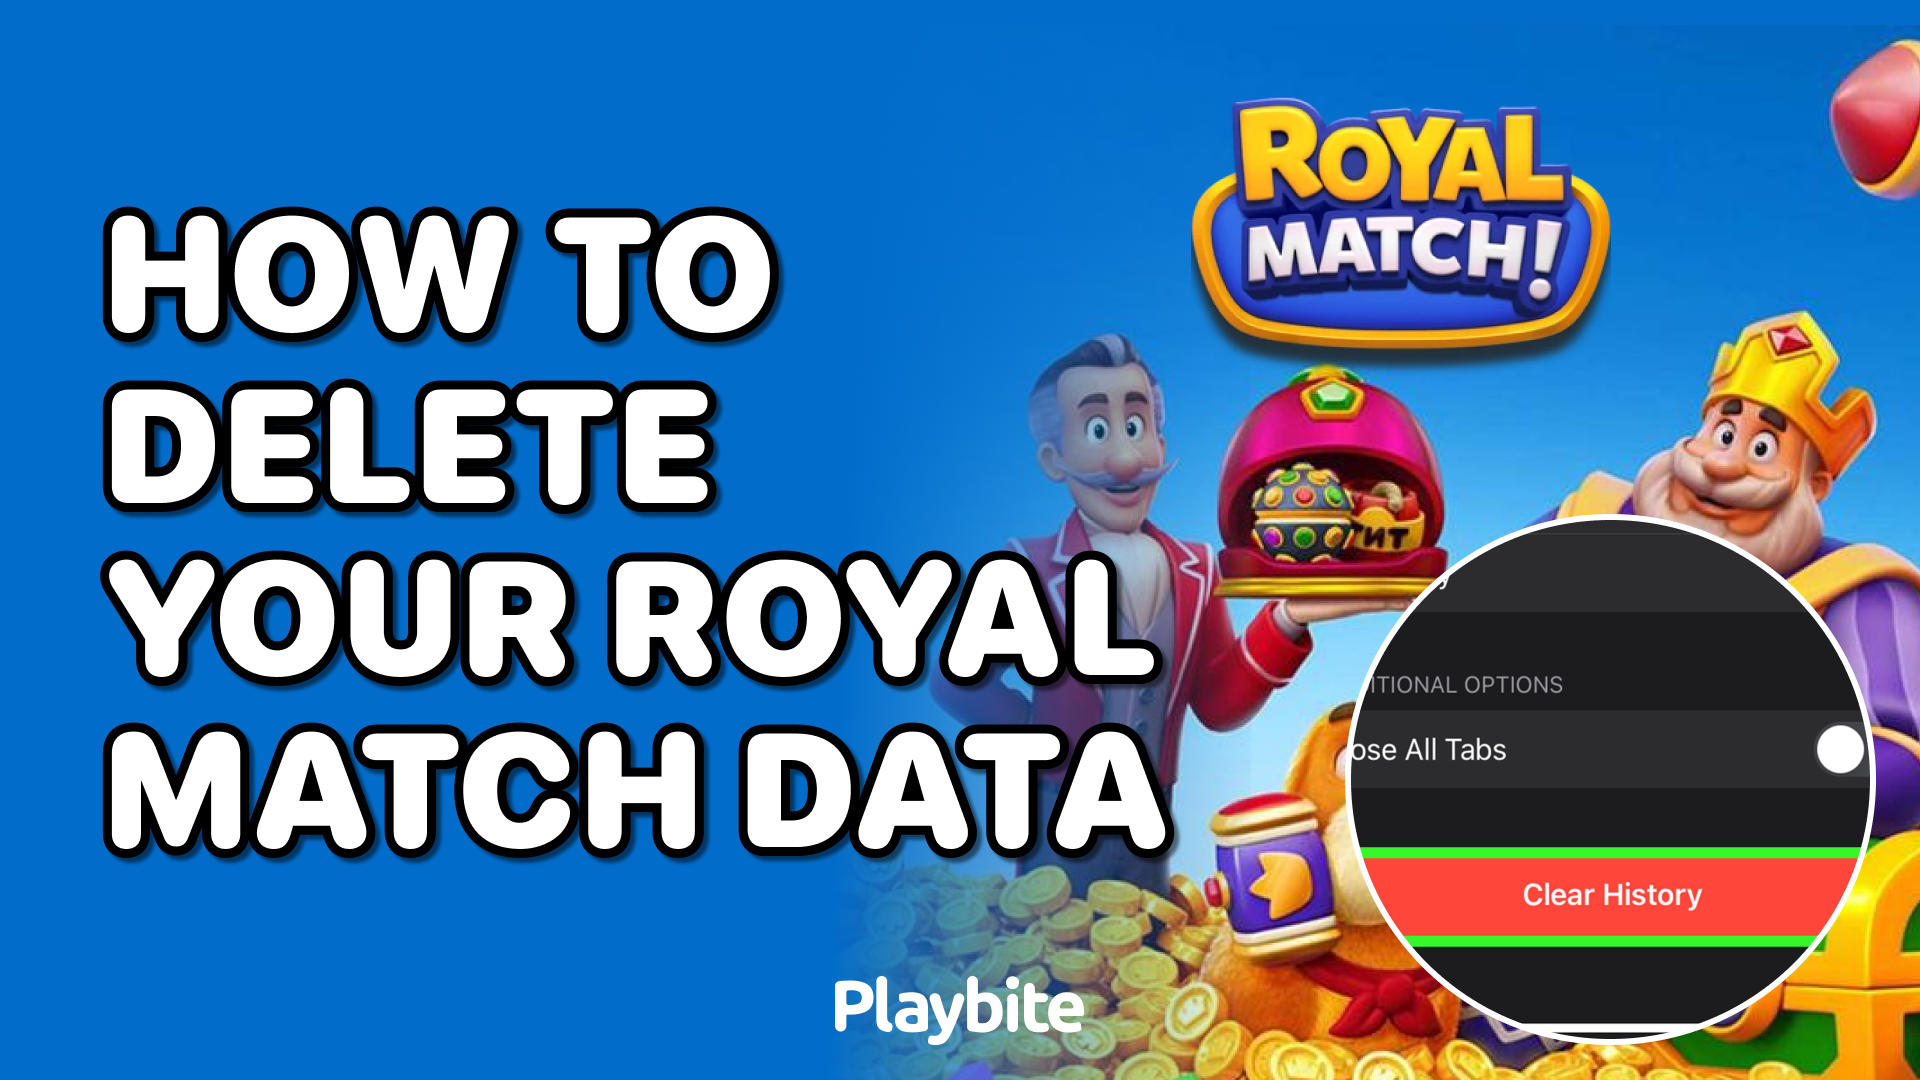 How to Delete Your Royal Match Data